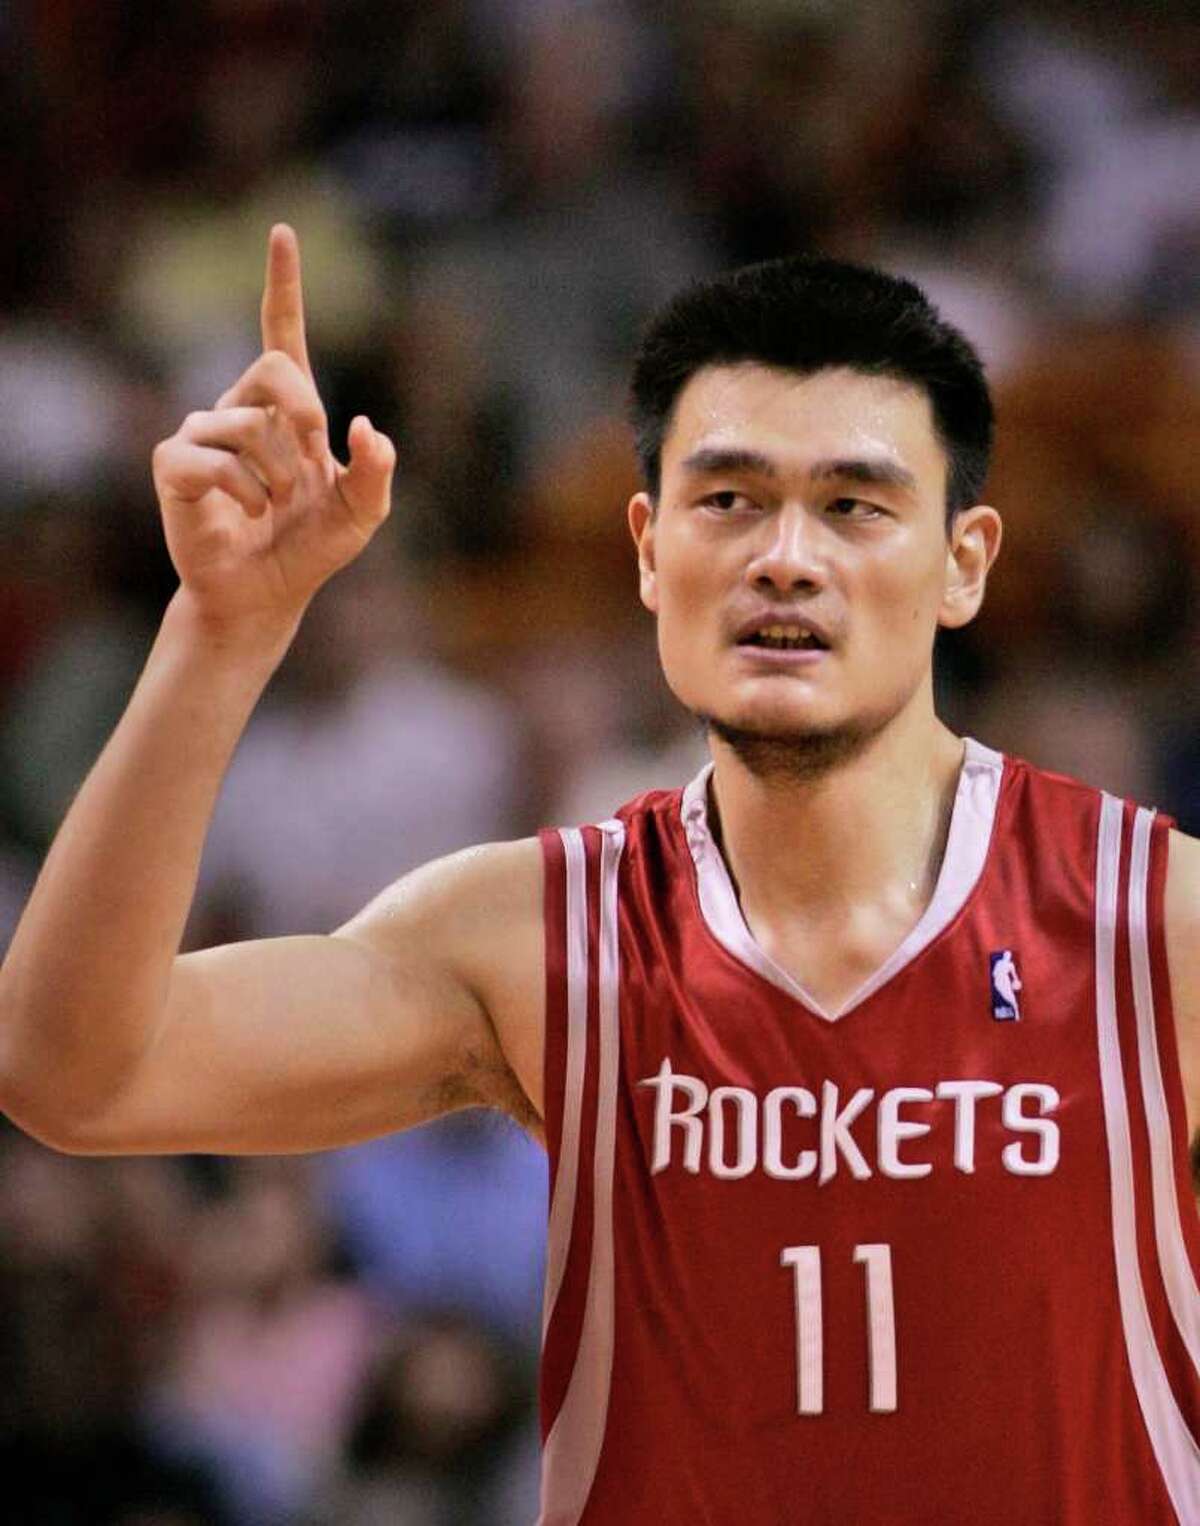 FILE - In this Nov. 12, 2006, file photo, Houston Rockets center Yao Ming, of China, celebrates a basket during the fourth quarter of an NBA basketball game against the Miami Heat in Miami. Yao has made it official, telling a packed news conference in his hometown Wednesday, July 20, 2011 that a series of injuries have forced him to retire from basketball. (AP Photo/Wilfredo Lee, File)